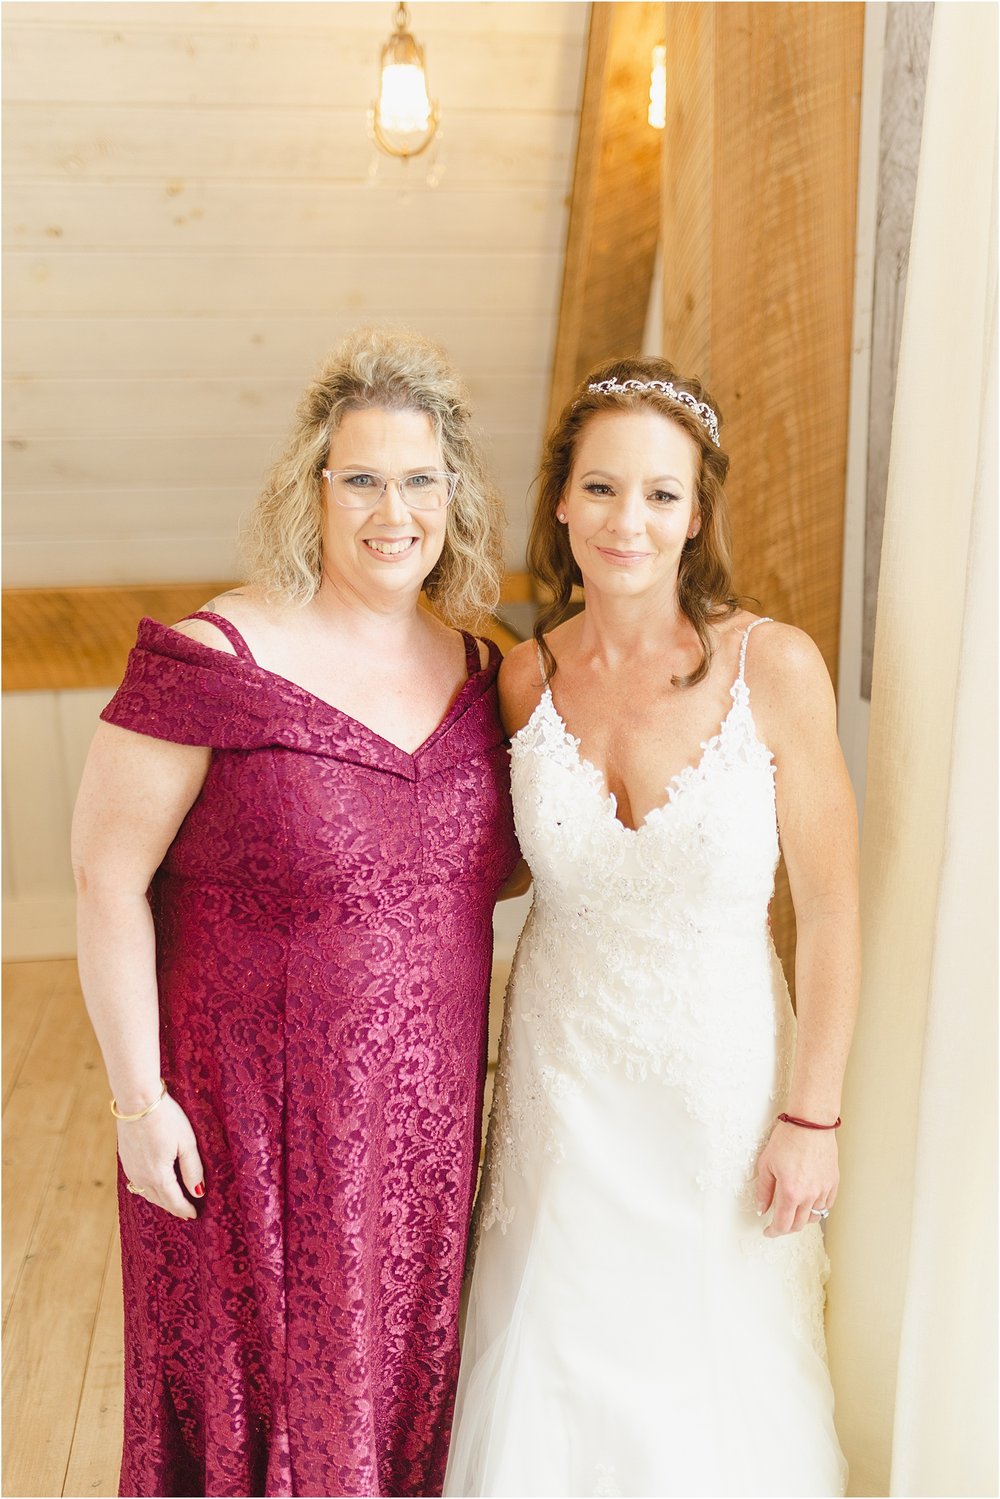 Photograph of Bride and her Maid of Honor